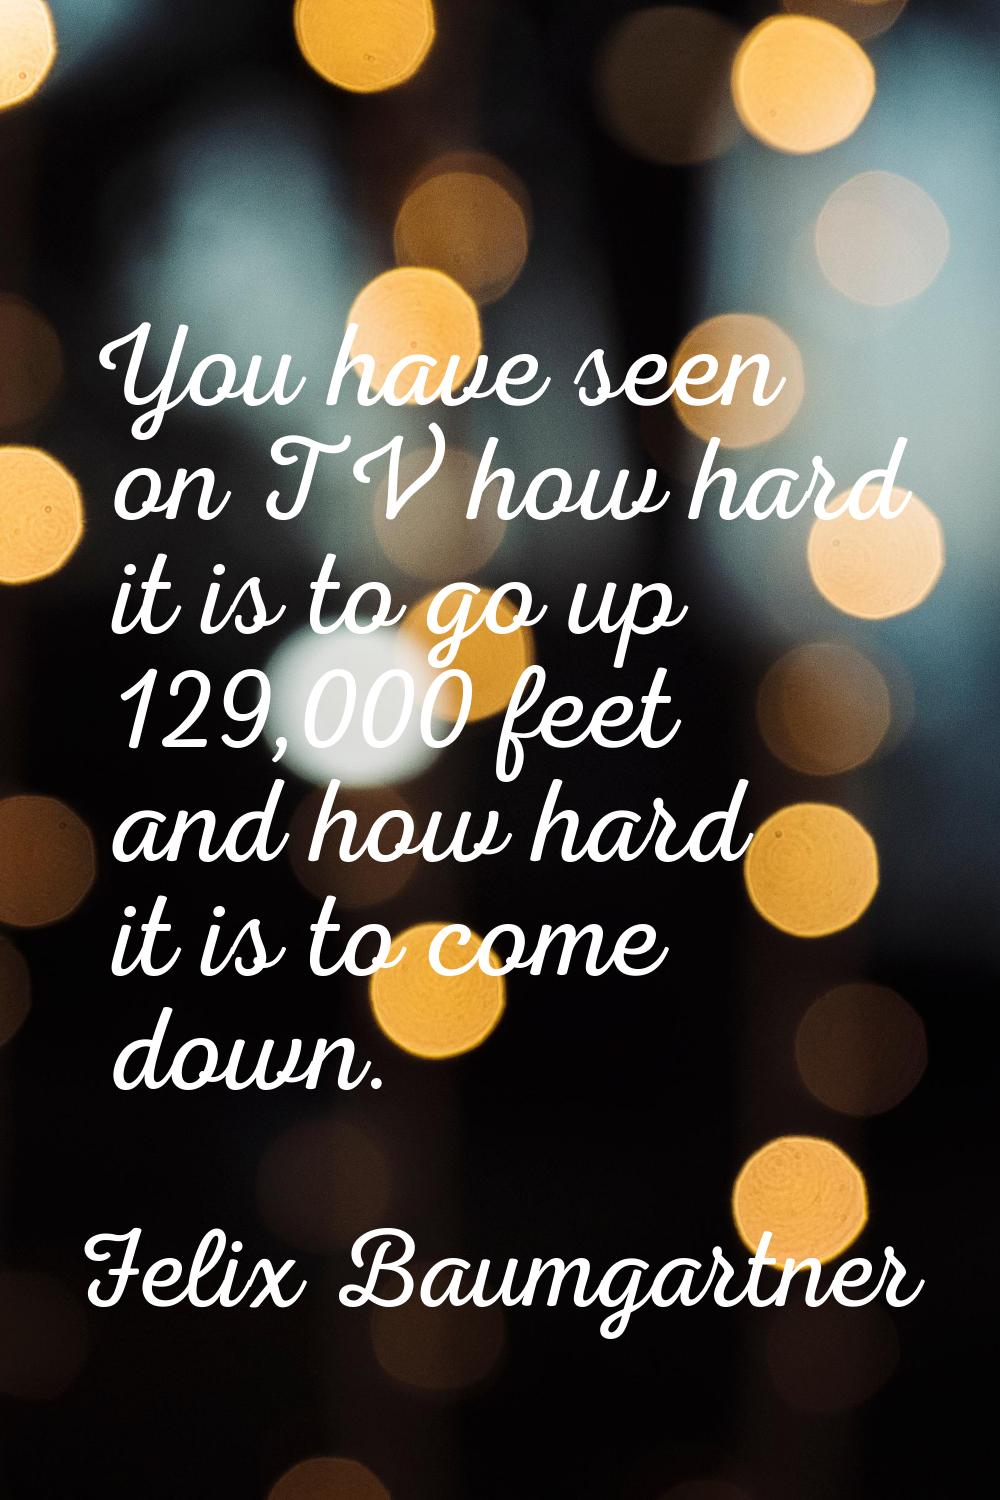 You have seen on TV how hard it is to go up 129,000 feet and how hard it is to come down.